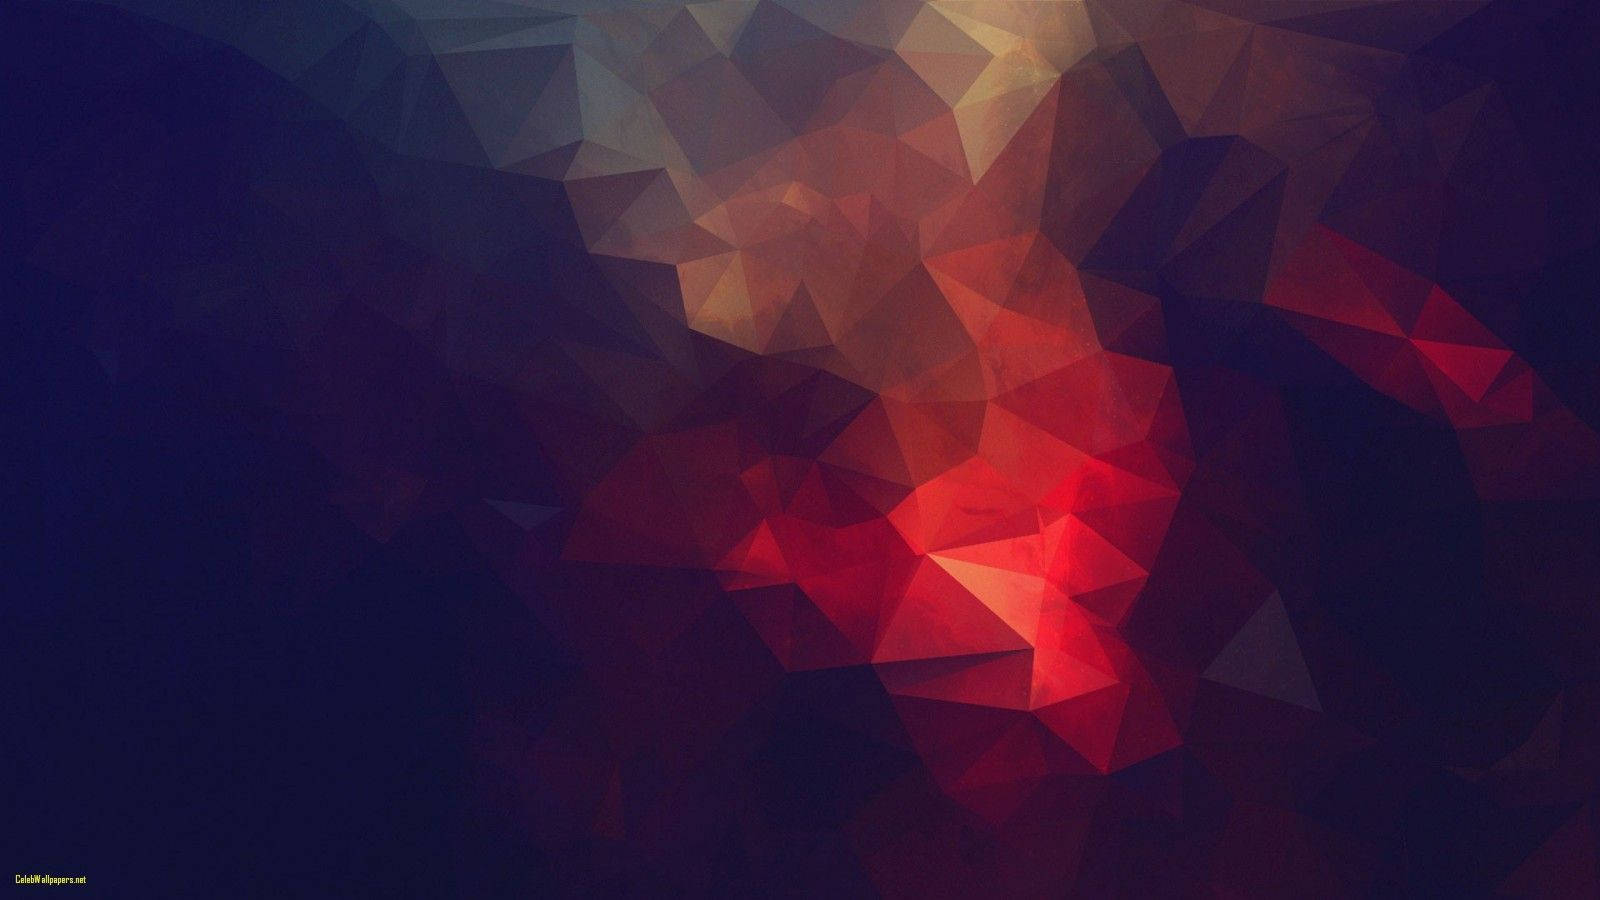 A colorful abstract artwork with red and blue - Low poly